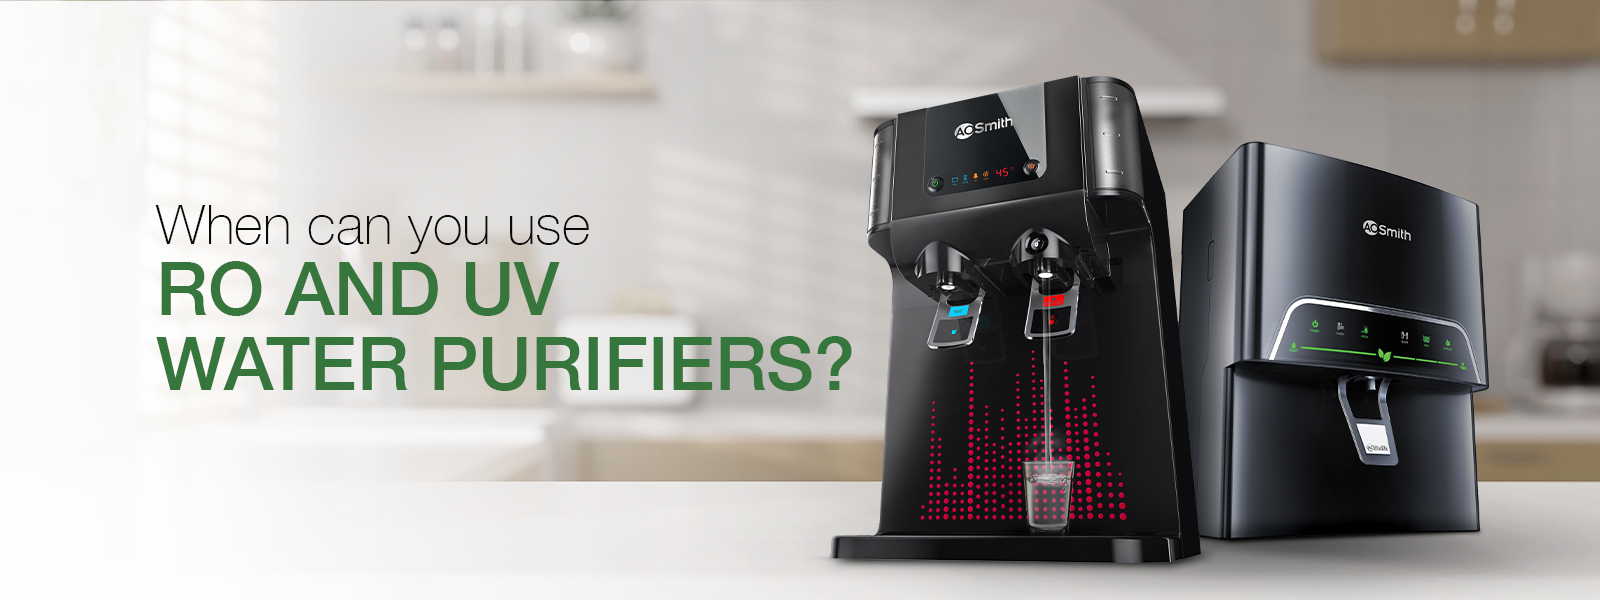 When Can You Use RO and UV Water Purifiers?